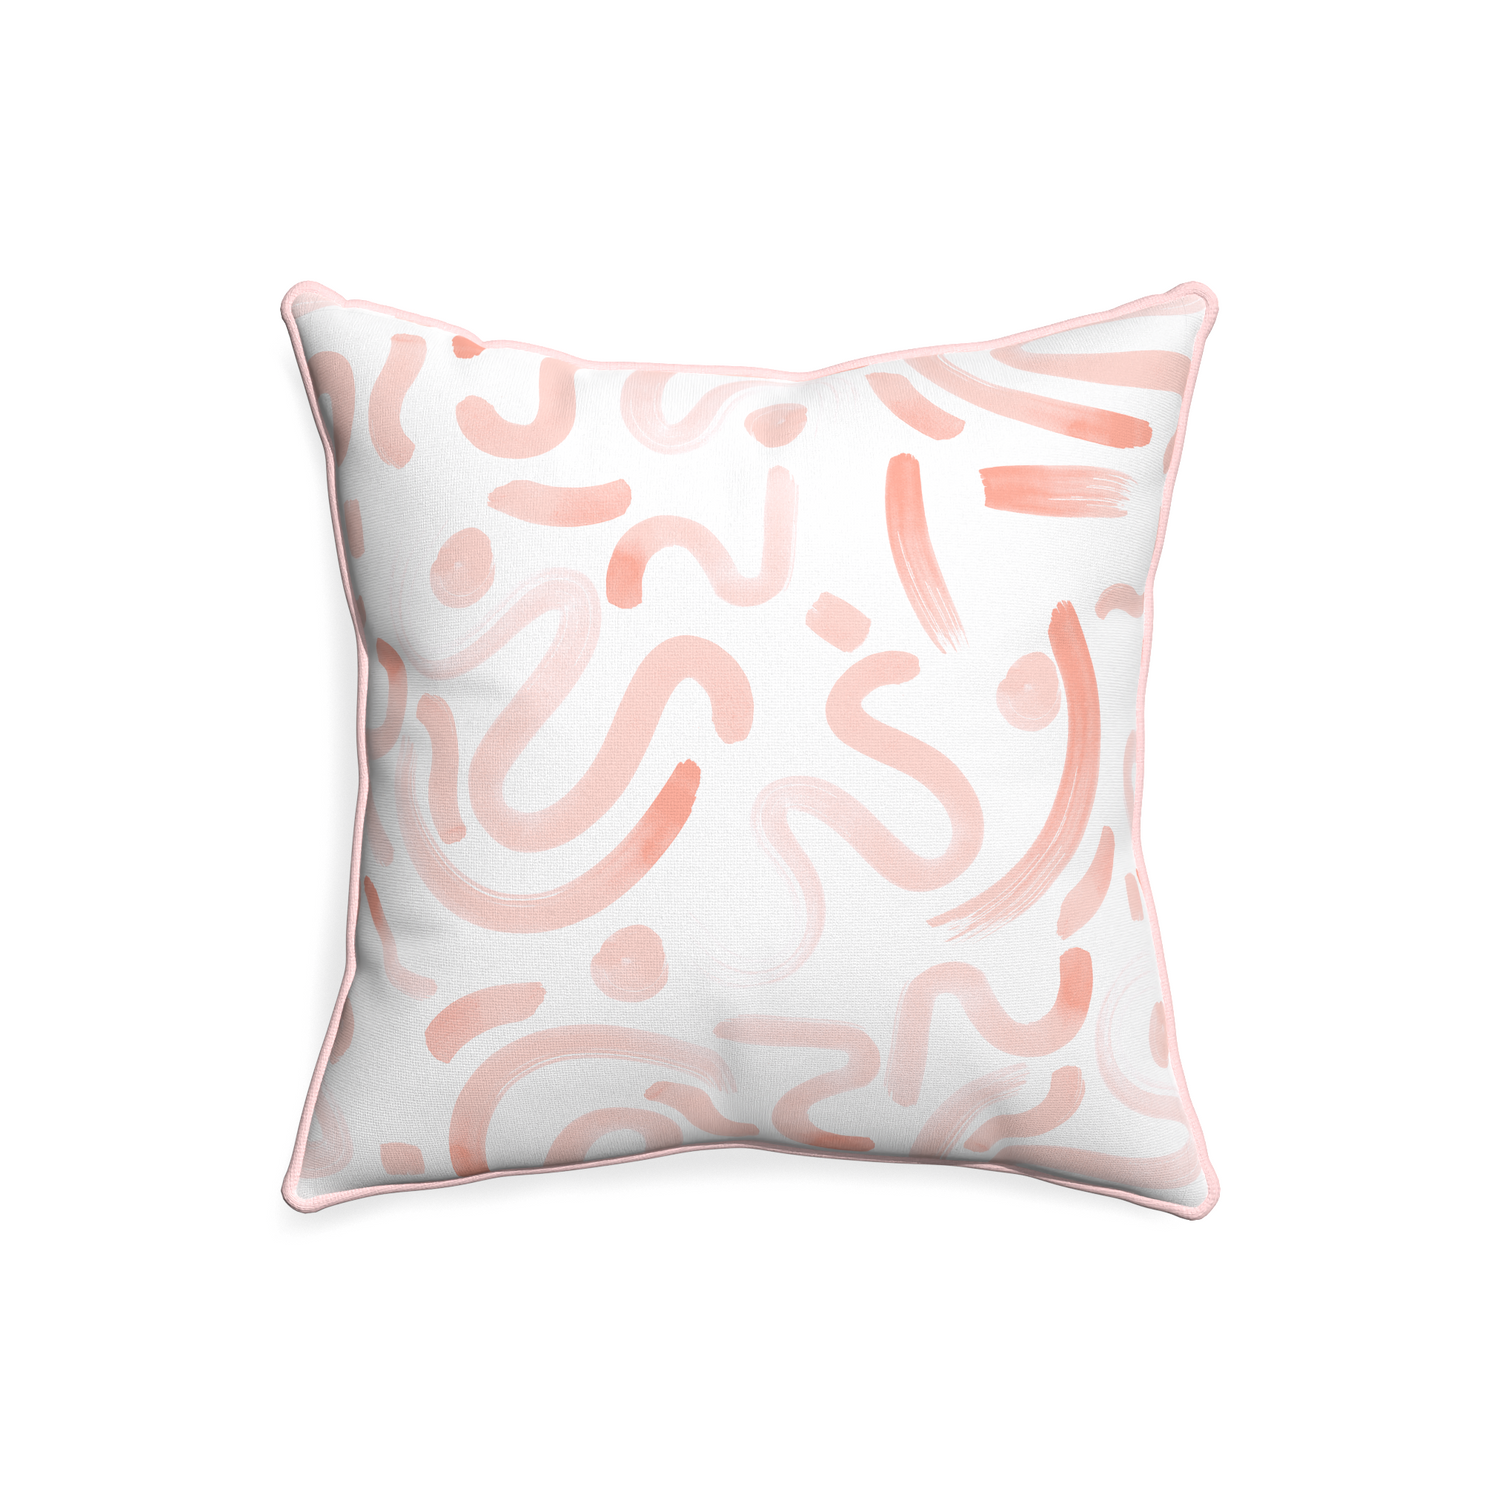 20-square hockney pink custom pillow with petal piping on white background